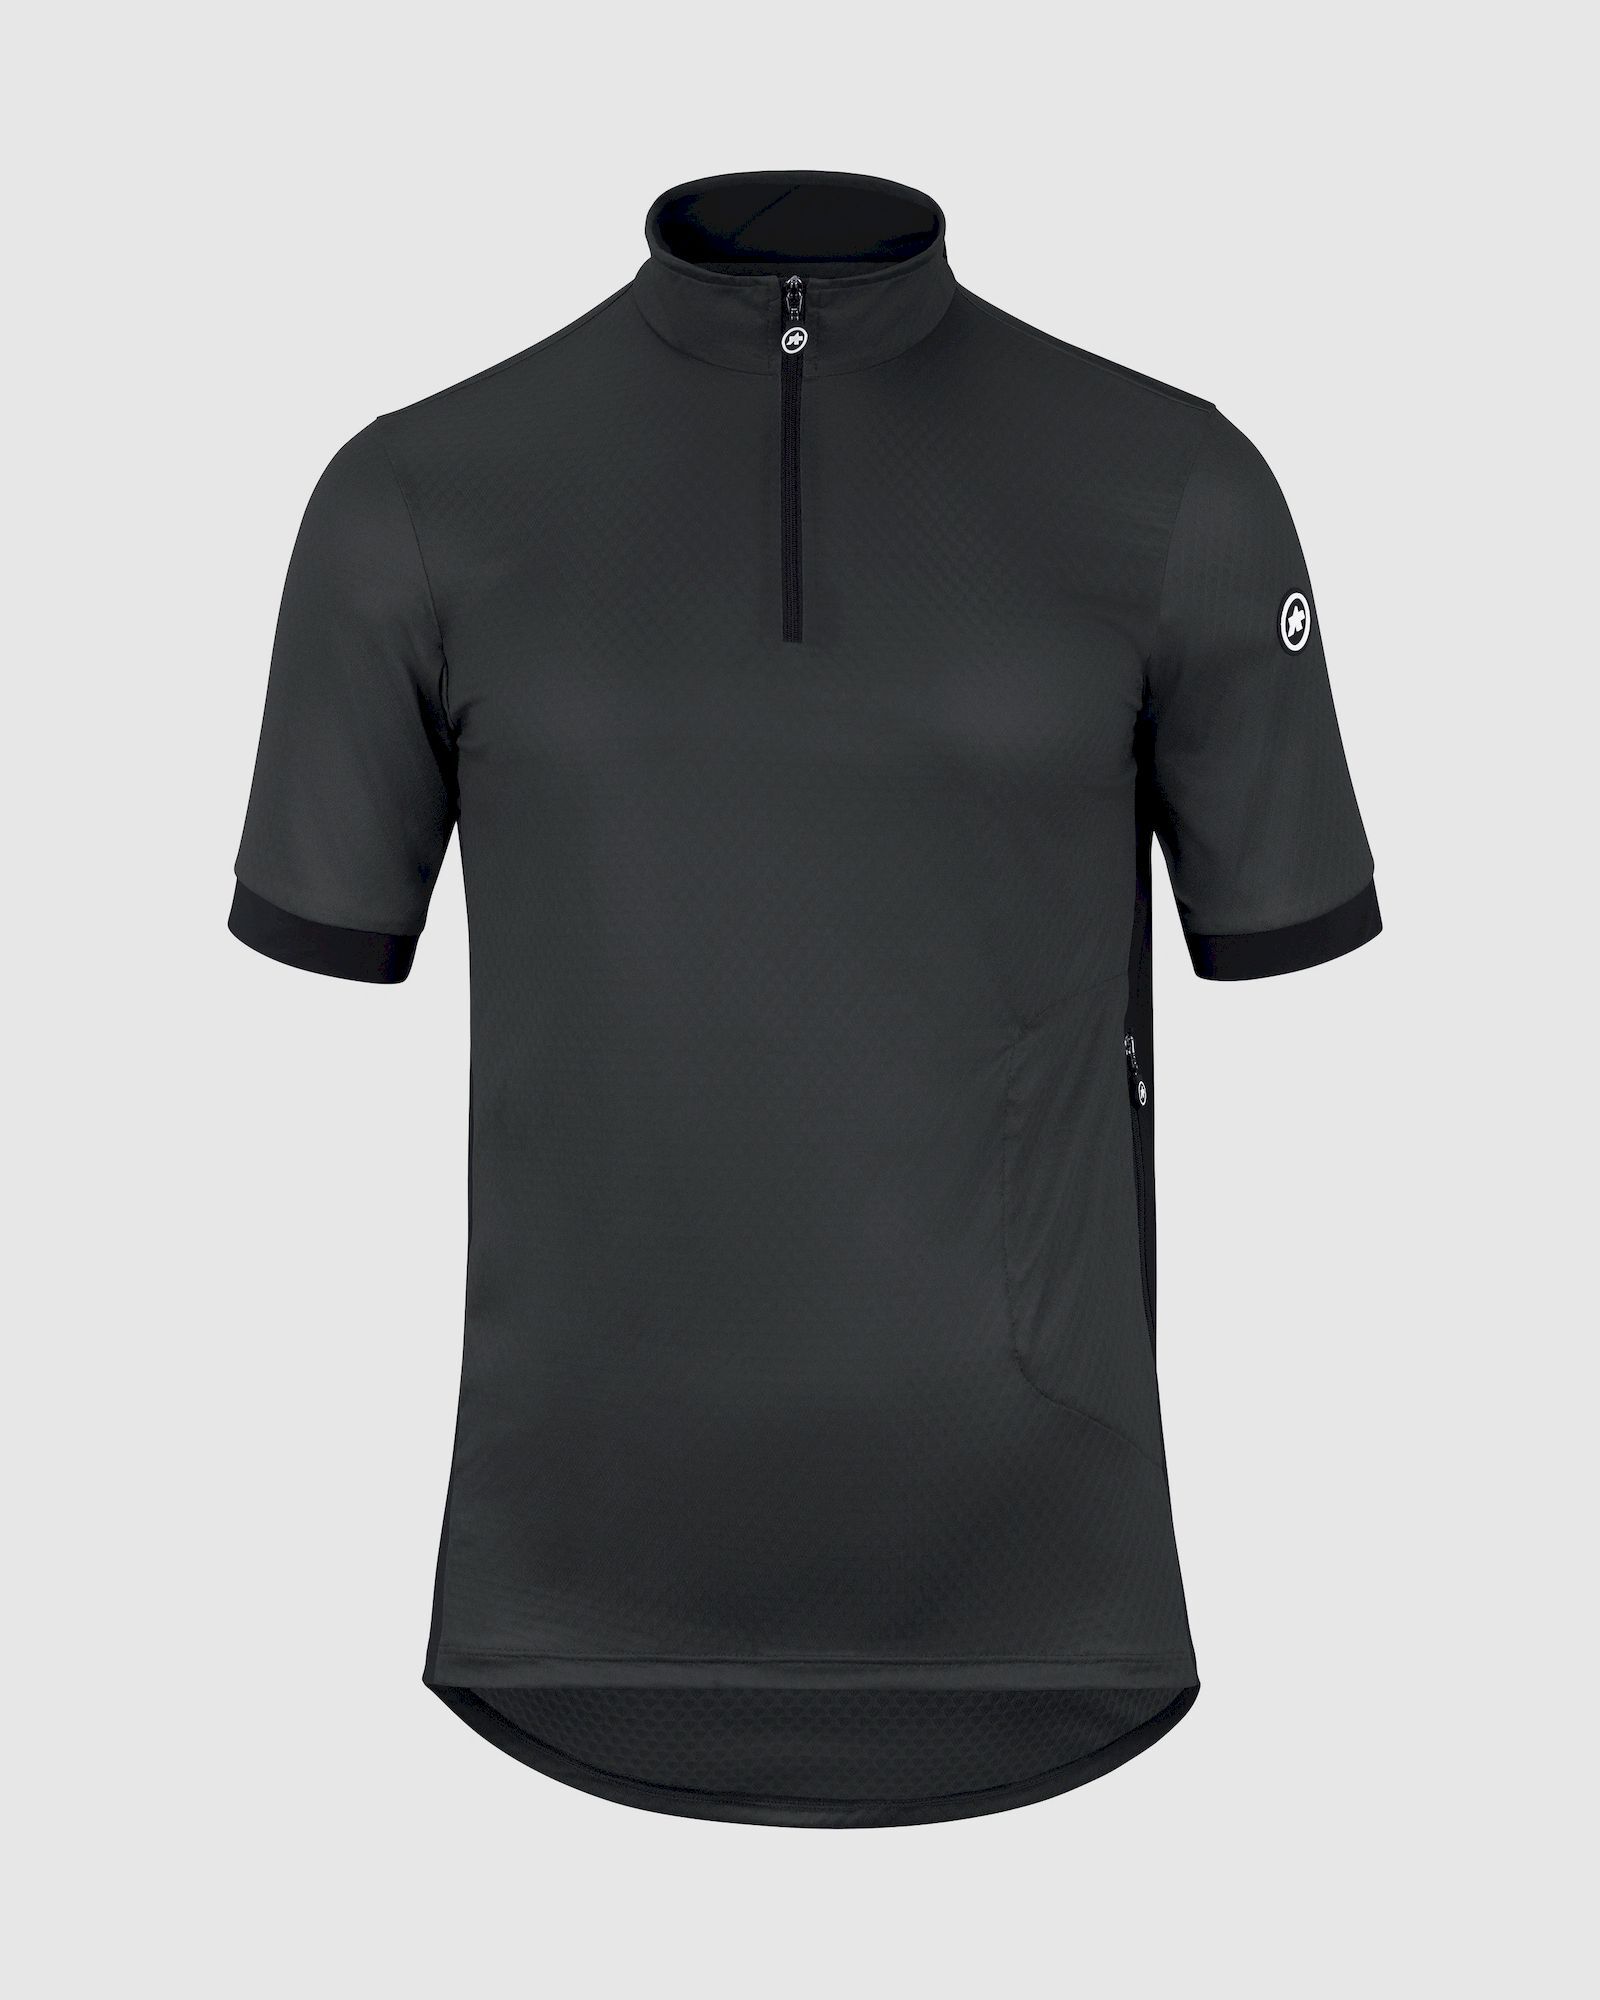 Assos Mille GTC Jersey C2 - Maillot vélo homme | Hardloop